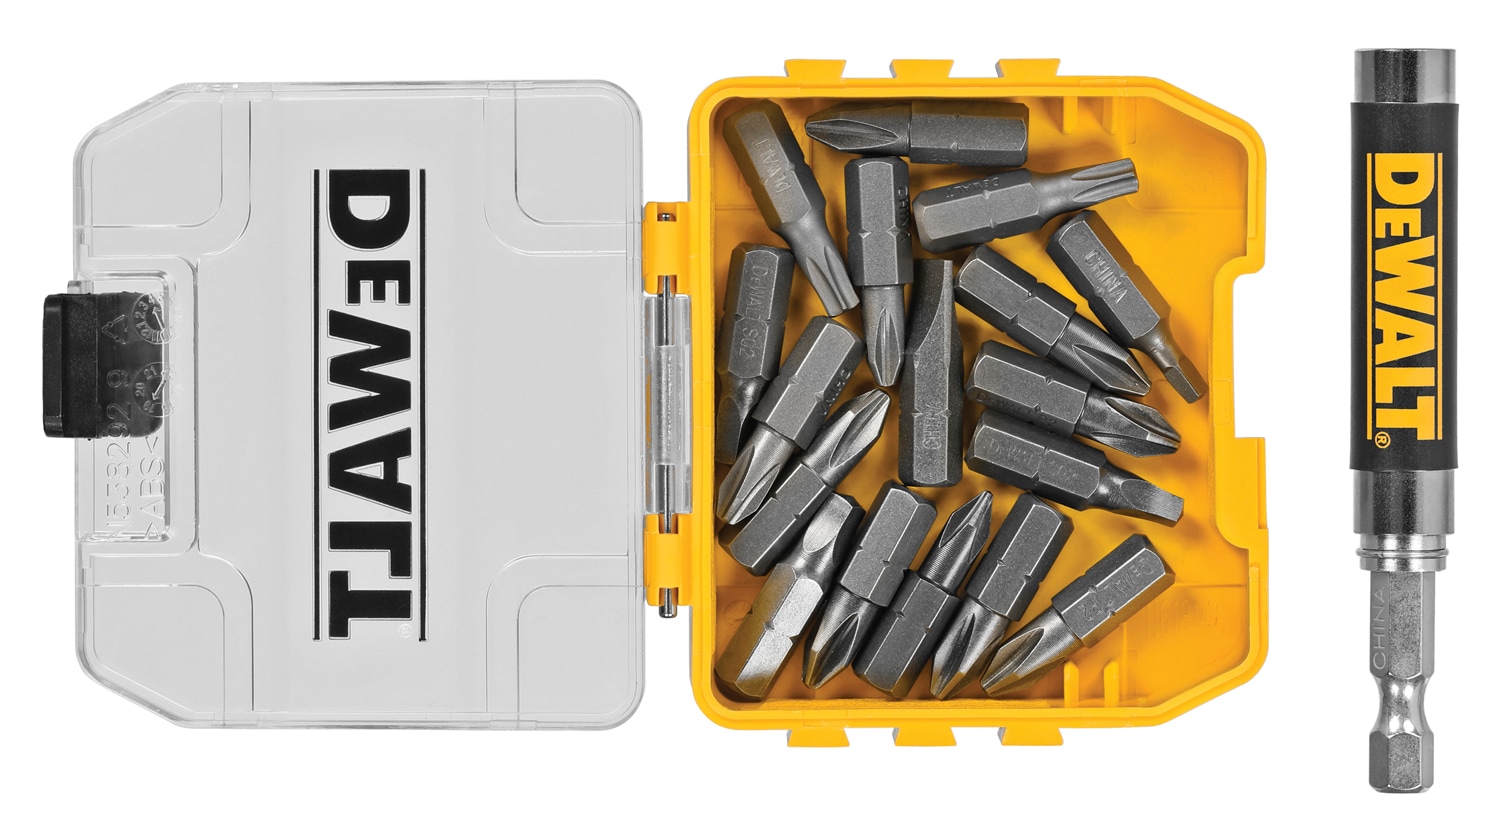 NEW Dewalt 28 Piece Magnetic Drive Guide Set Bits DW2057 Quick & Free Shipping 